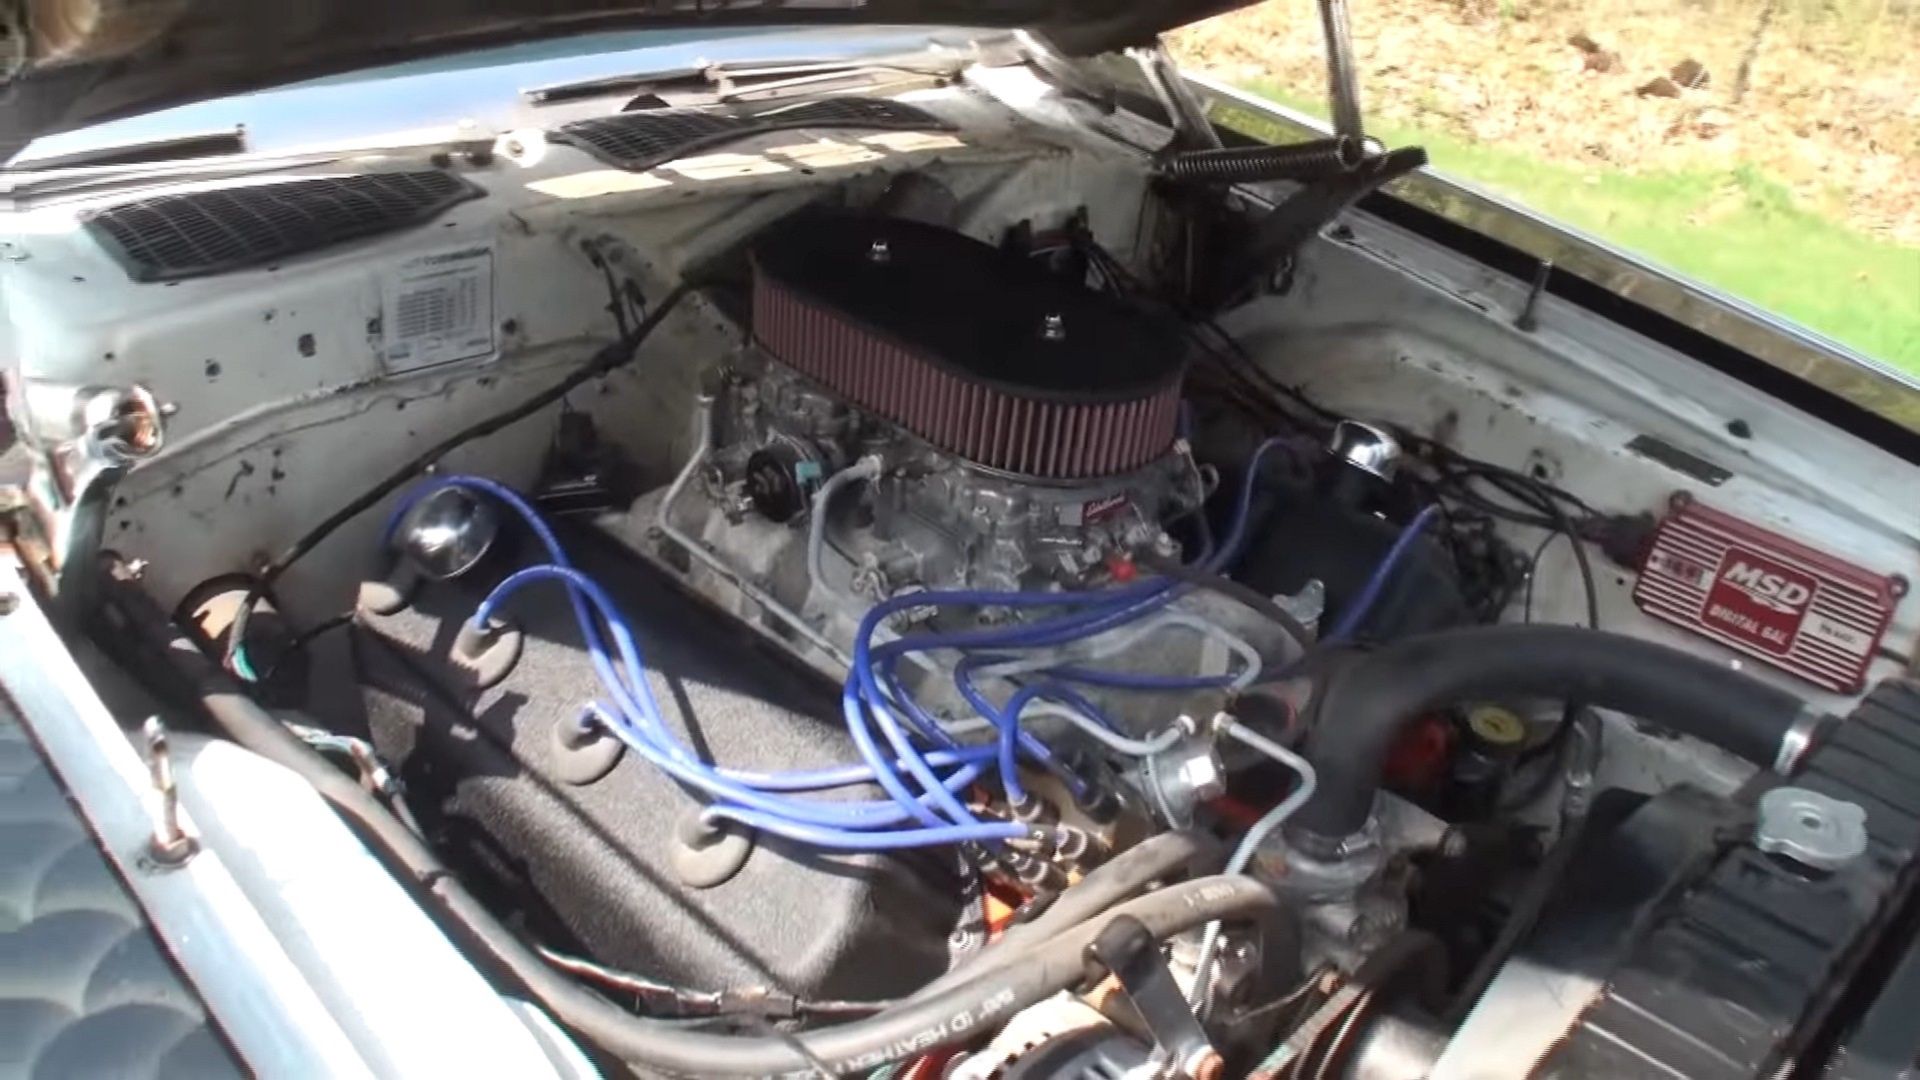 Under the hood of Bill Wyso Challenger drag car